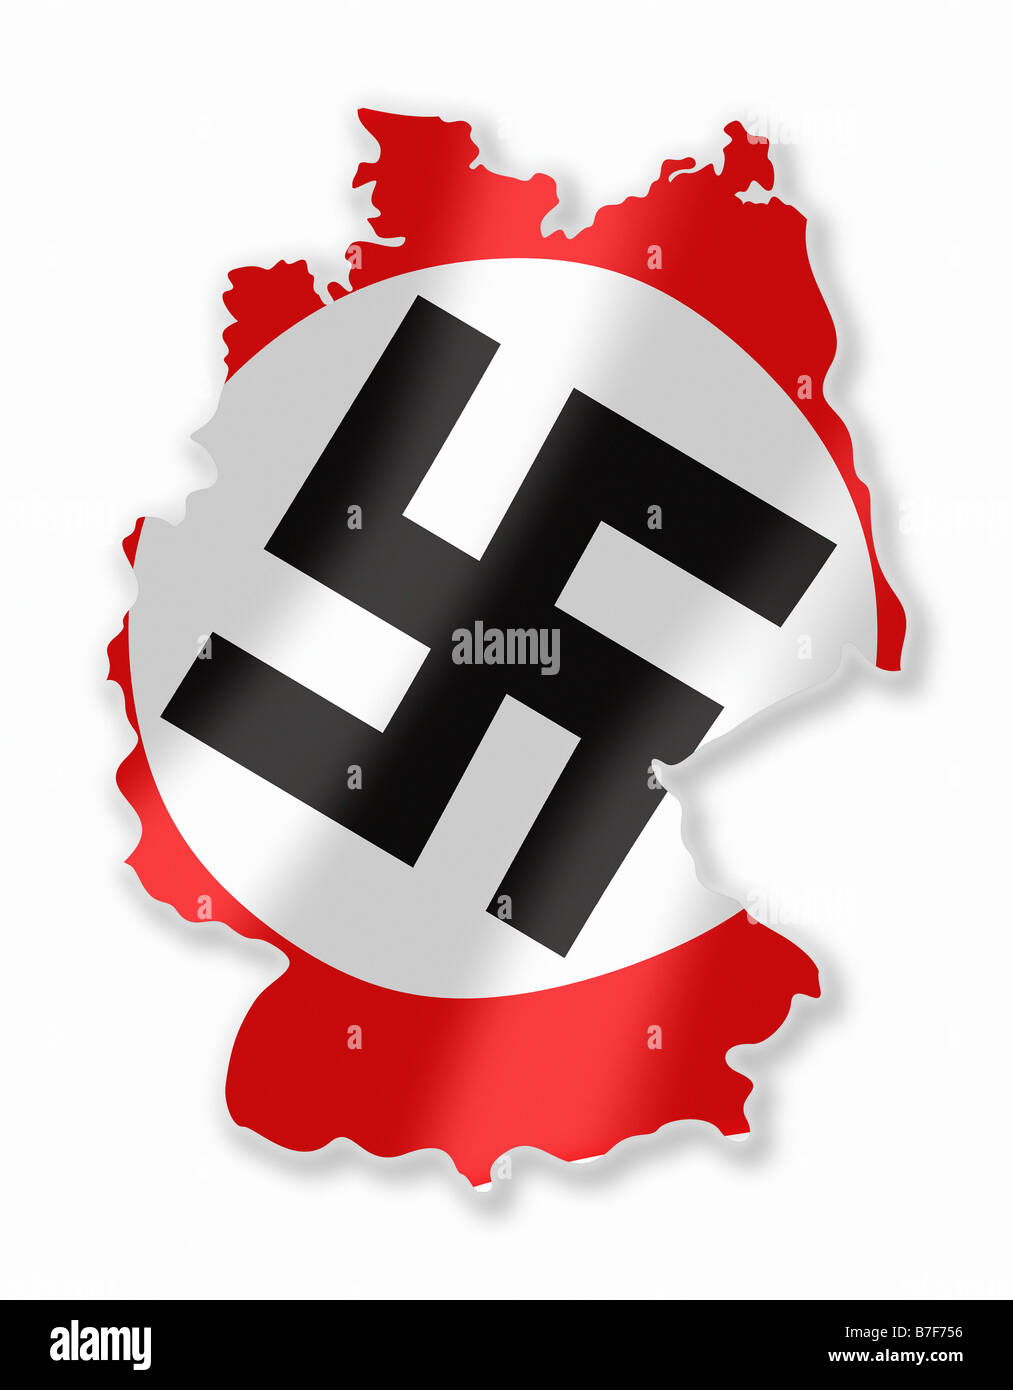 Nazi Flag Third Reich Waving In German Country Shape/Map Stock Photo